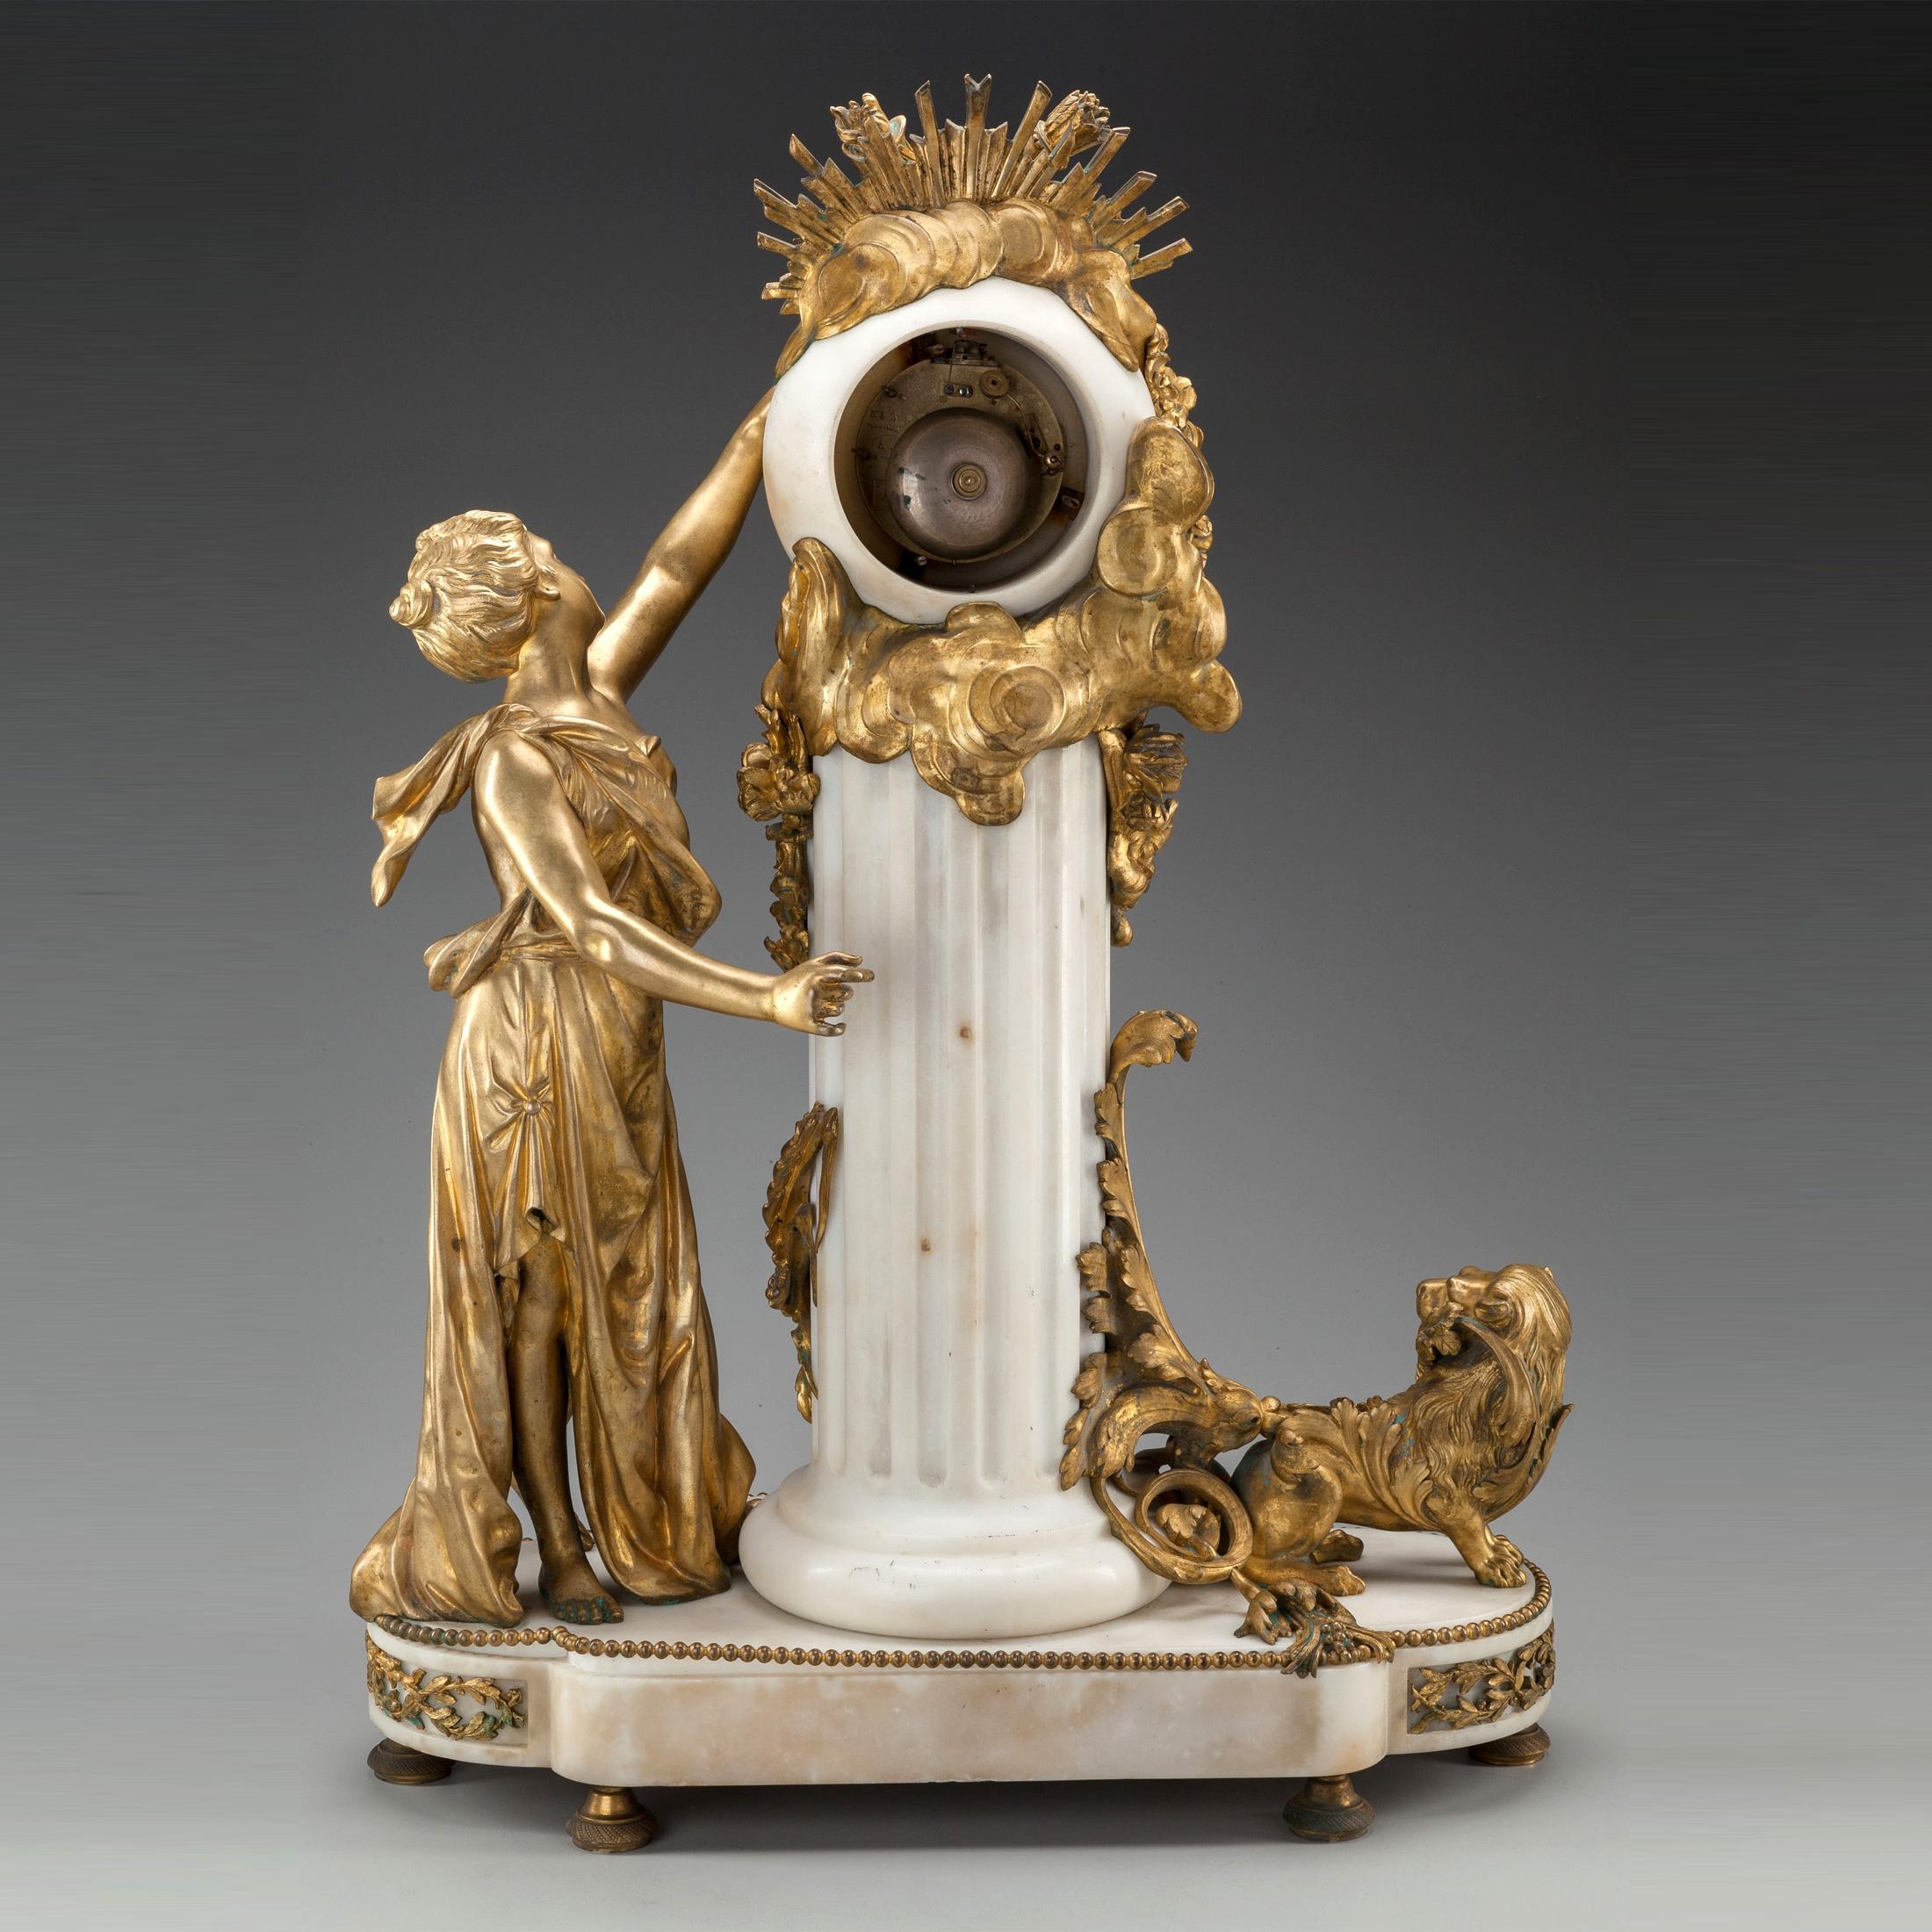 Louis XVI style gilt bronze and white marble figural mantel clock
Origin: French
Date: circa 19th century
Size: 26-1/2 in x 19 in x 10-1/4 in.
 